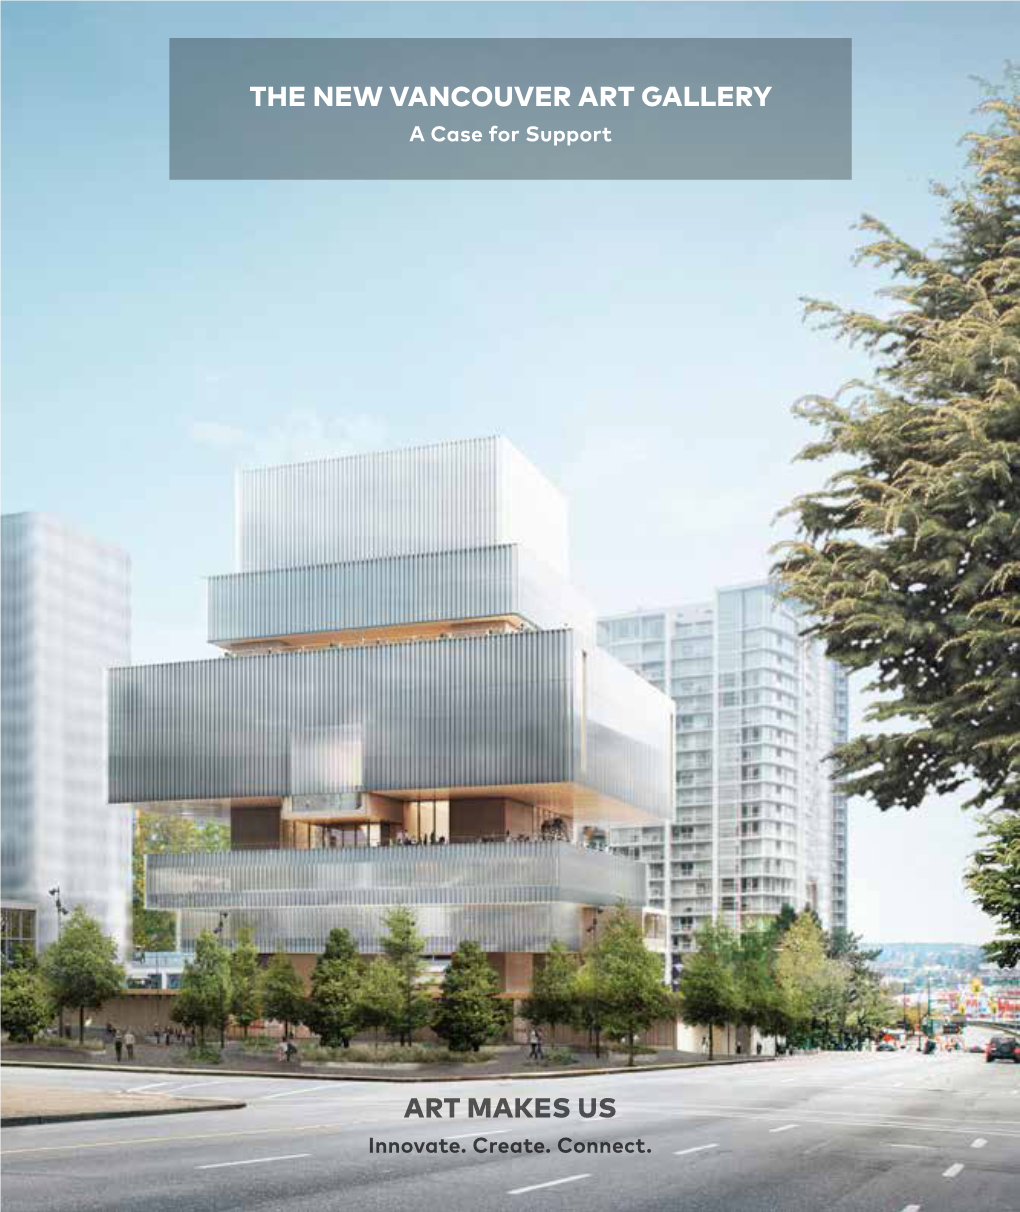 THE NEW VANCOUVER ART GALLERY a Case for Support